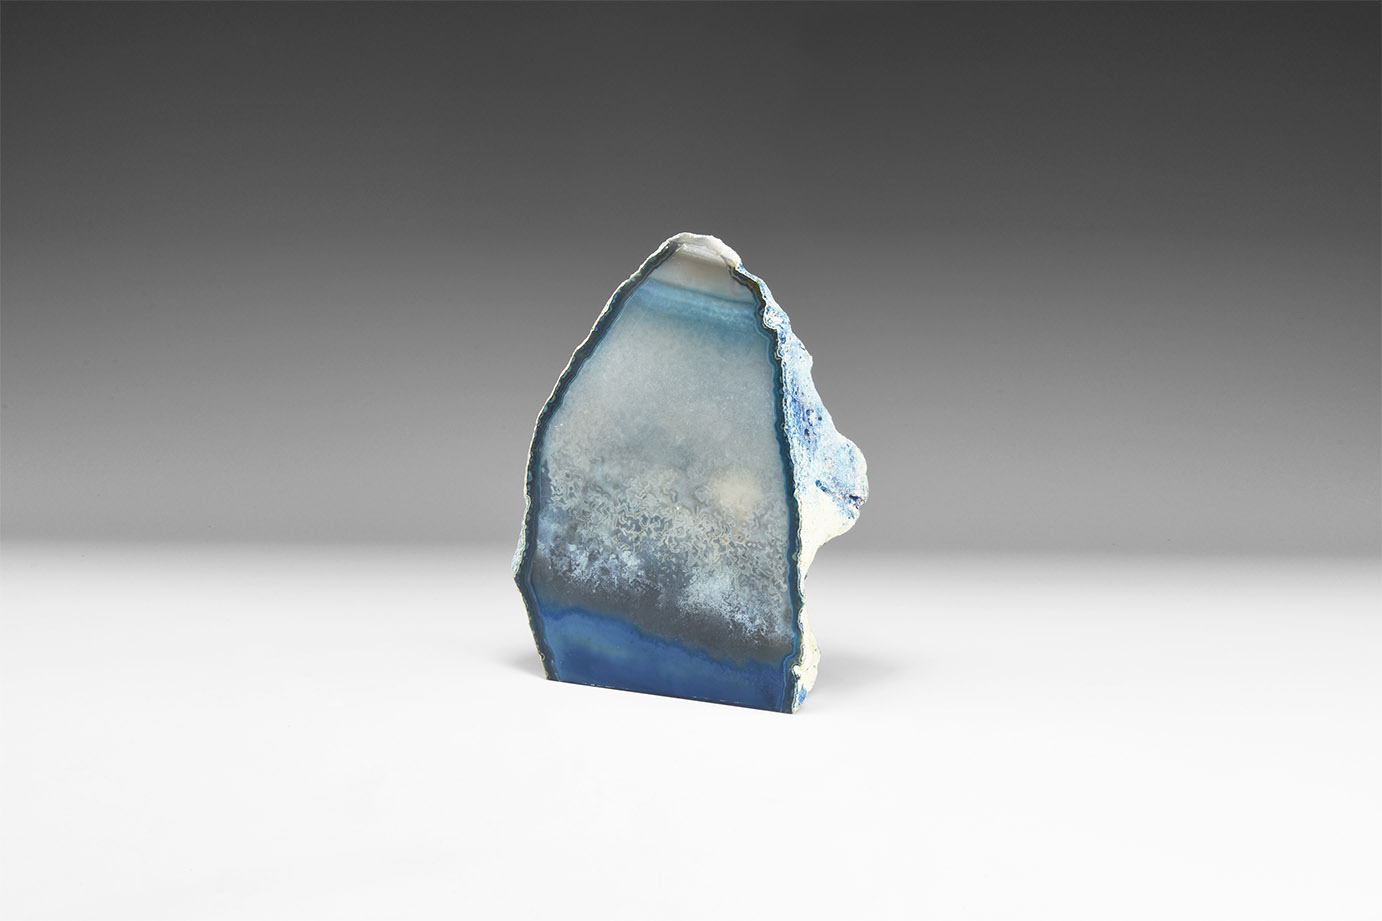 Natural History - Blue Polished Agate Display Piece